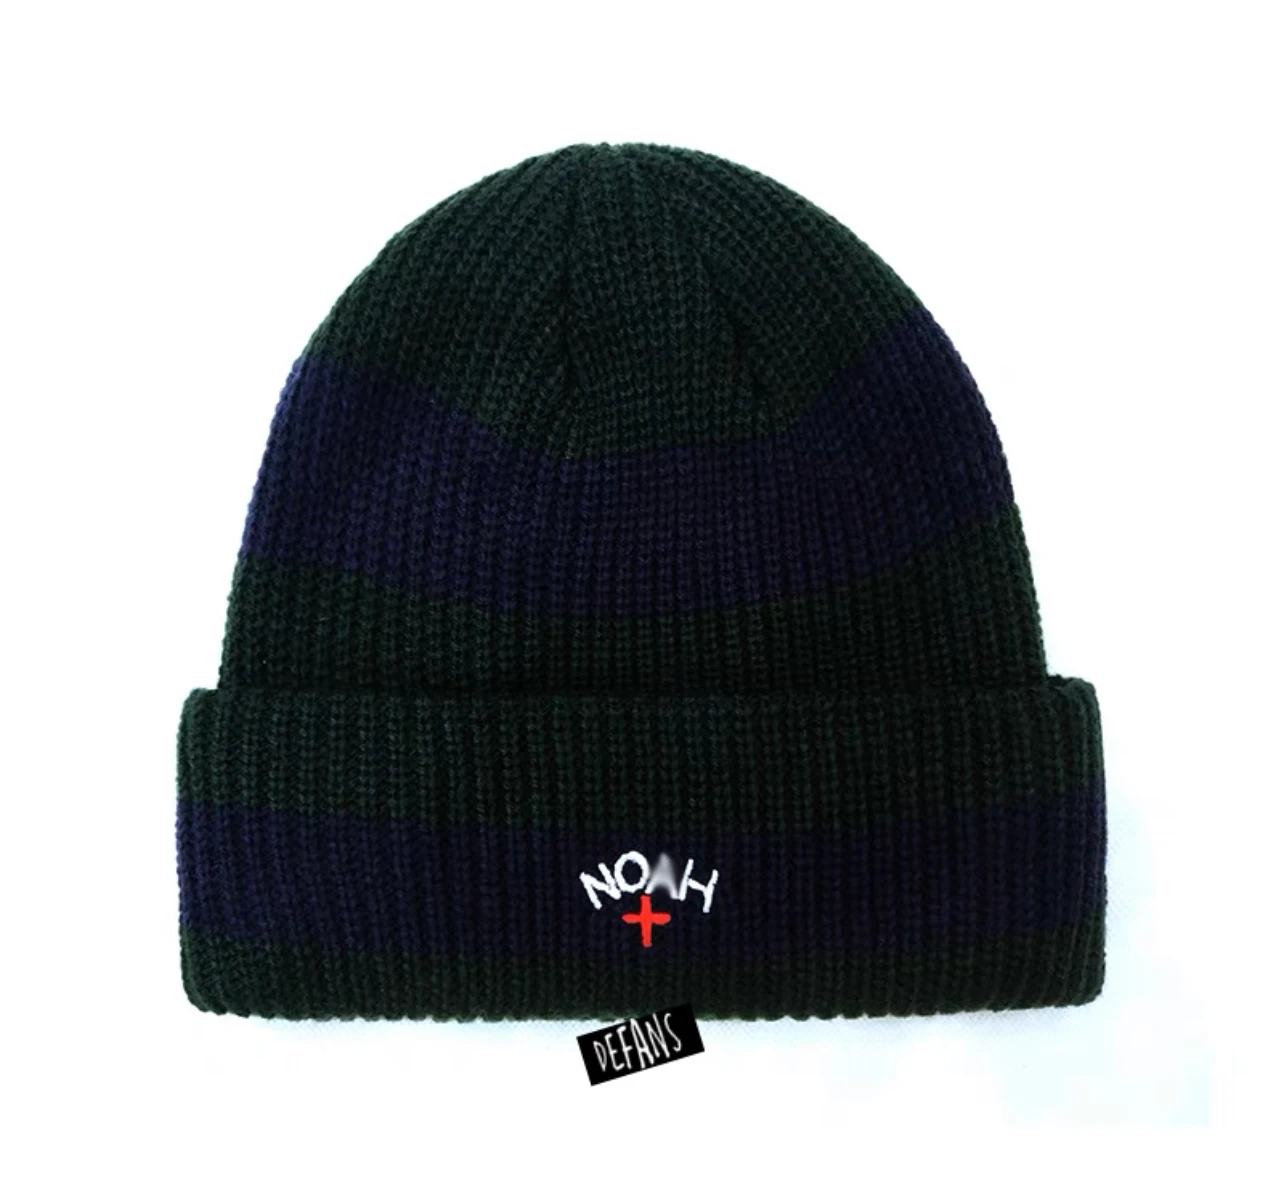 DEFANS NOAH CORE LOGO BEANIE Striped Wool Hat Male Cross Embroidery Knitted  Cold Hat Female